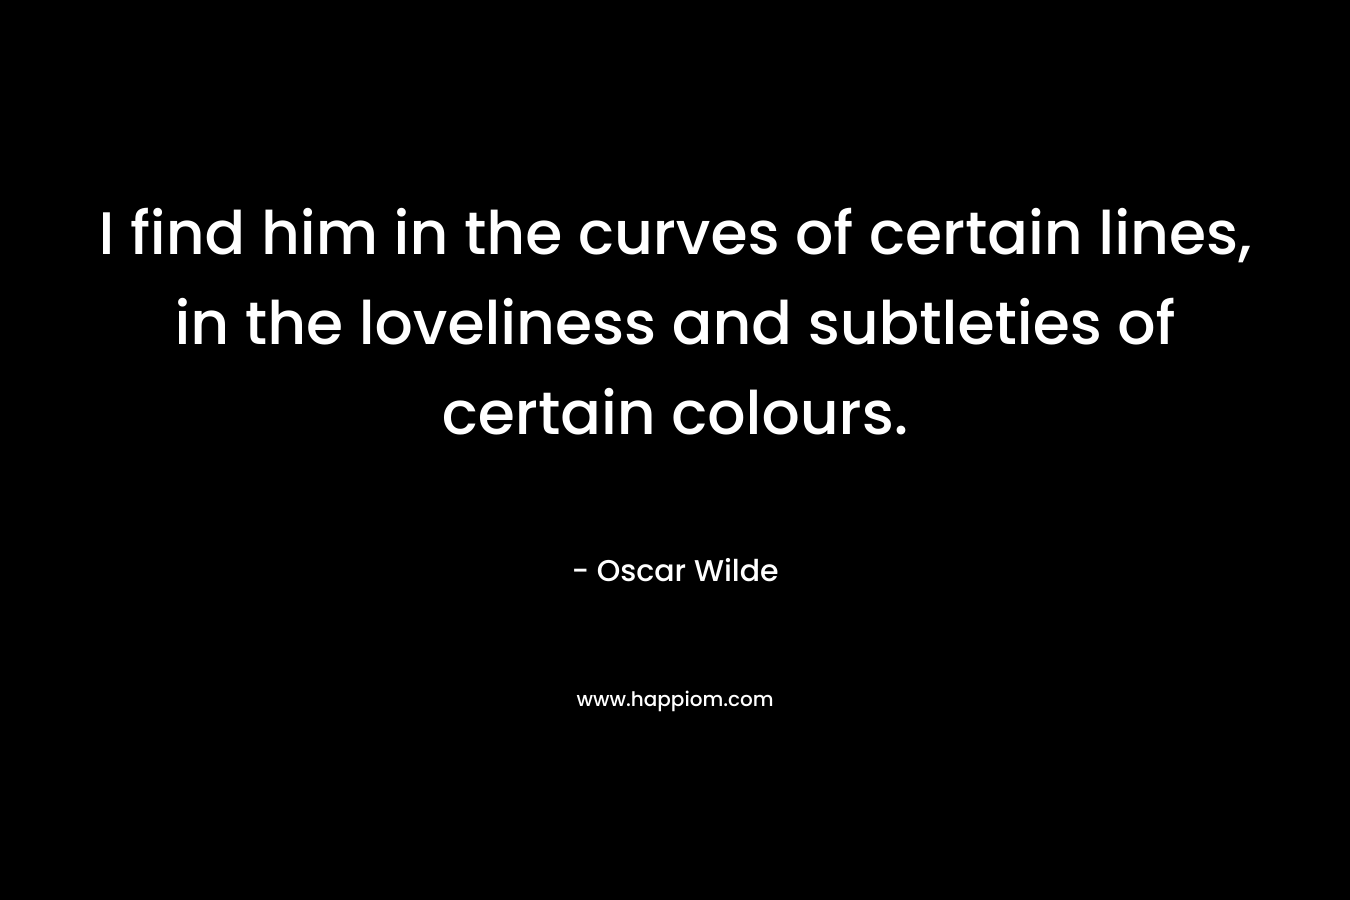 I find him in the curves of certain lines, in the loveliness and subtleties of certain colours. – Oscar Wilde